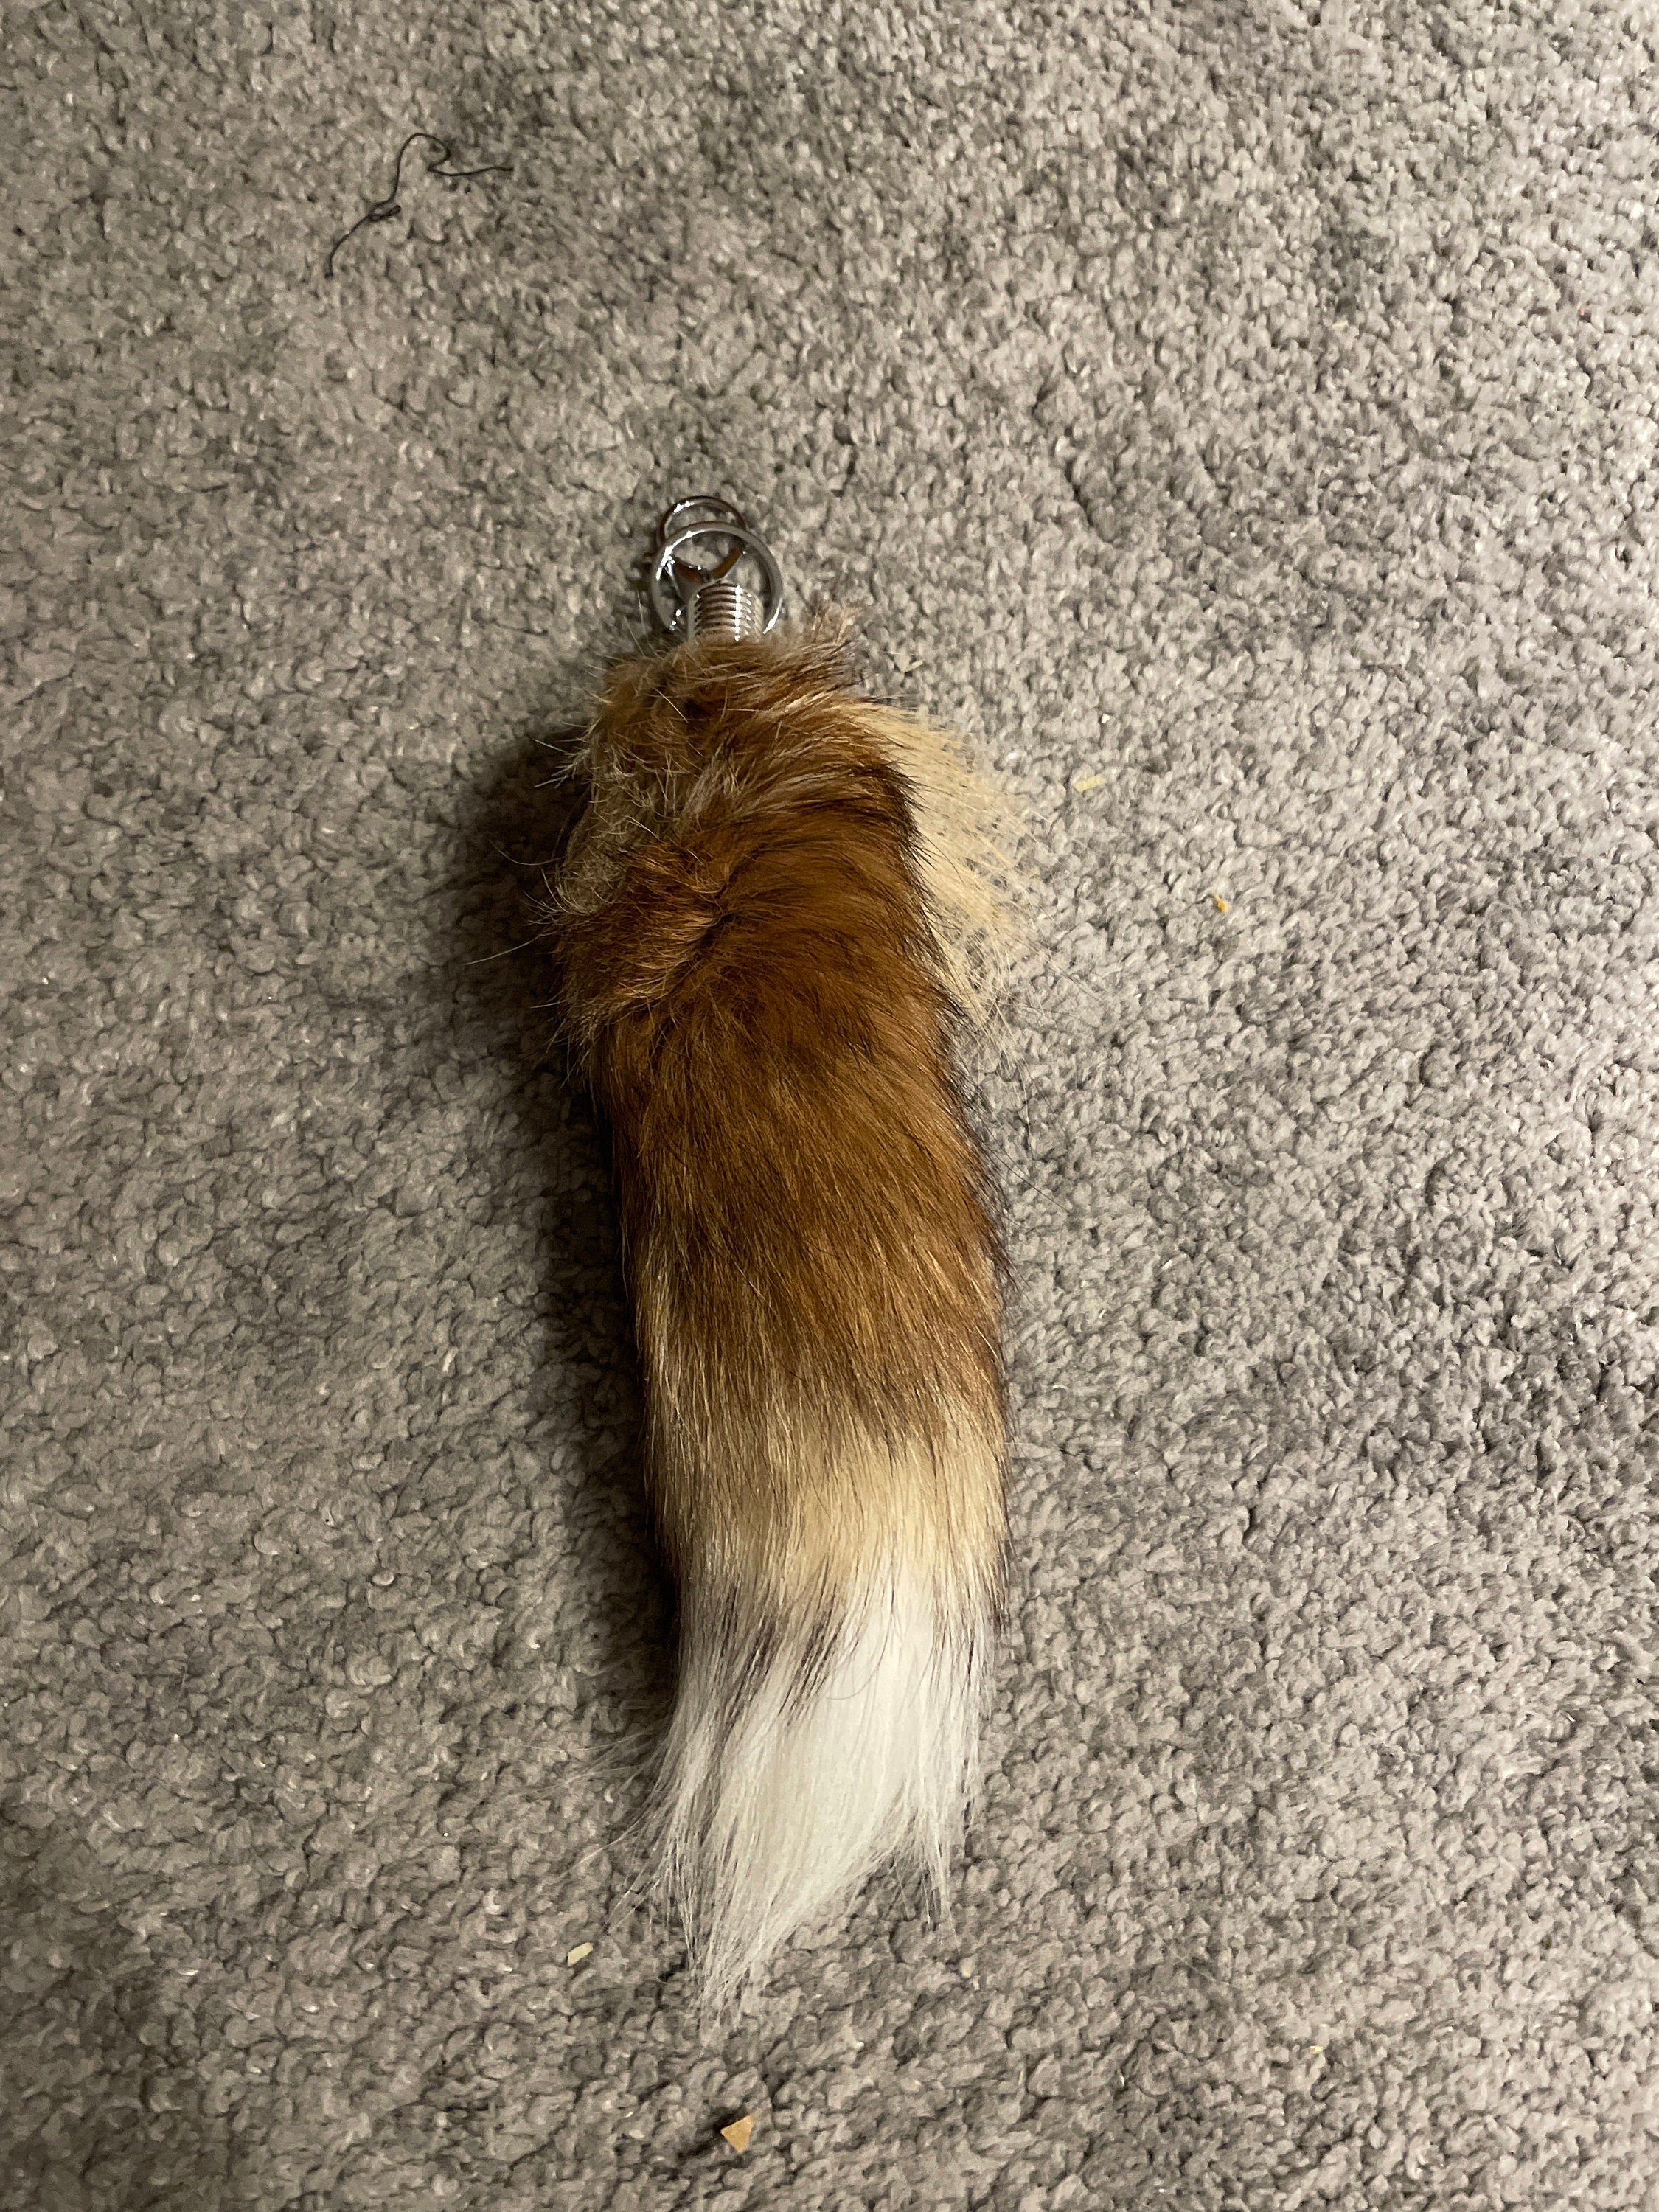 Got my first tail✨✨ : r/Therian